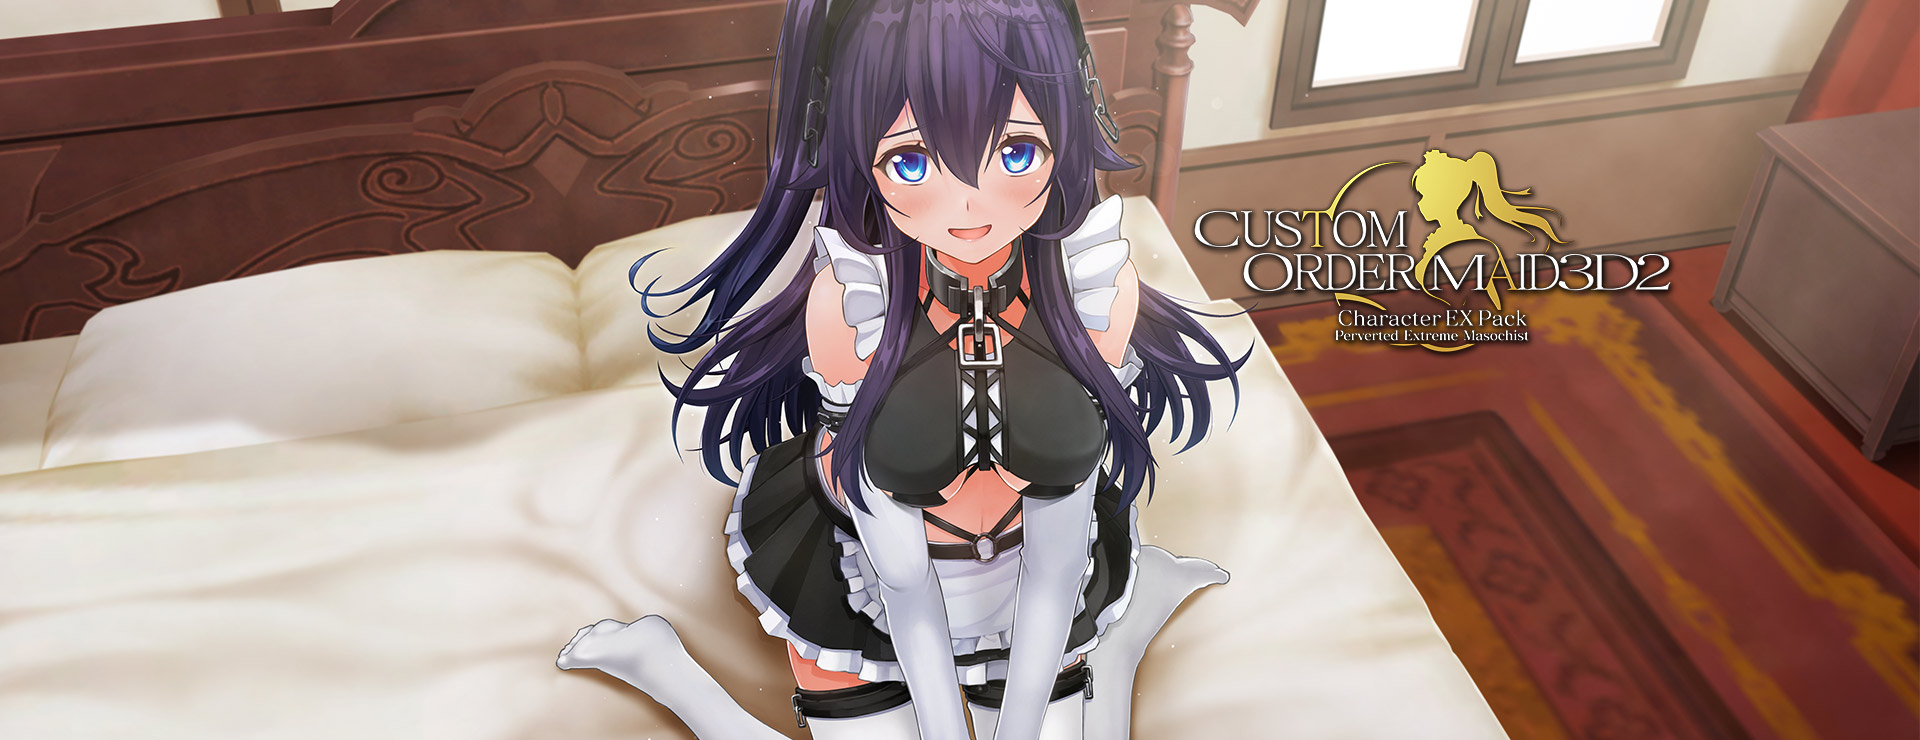 Custom Order Maid 3D 2: Character EX Pack Perverted Extreme Masochist - Simulación Juego